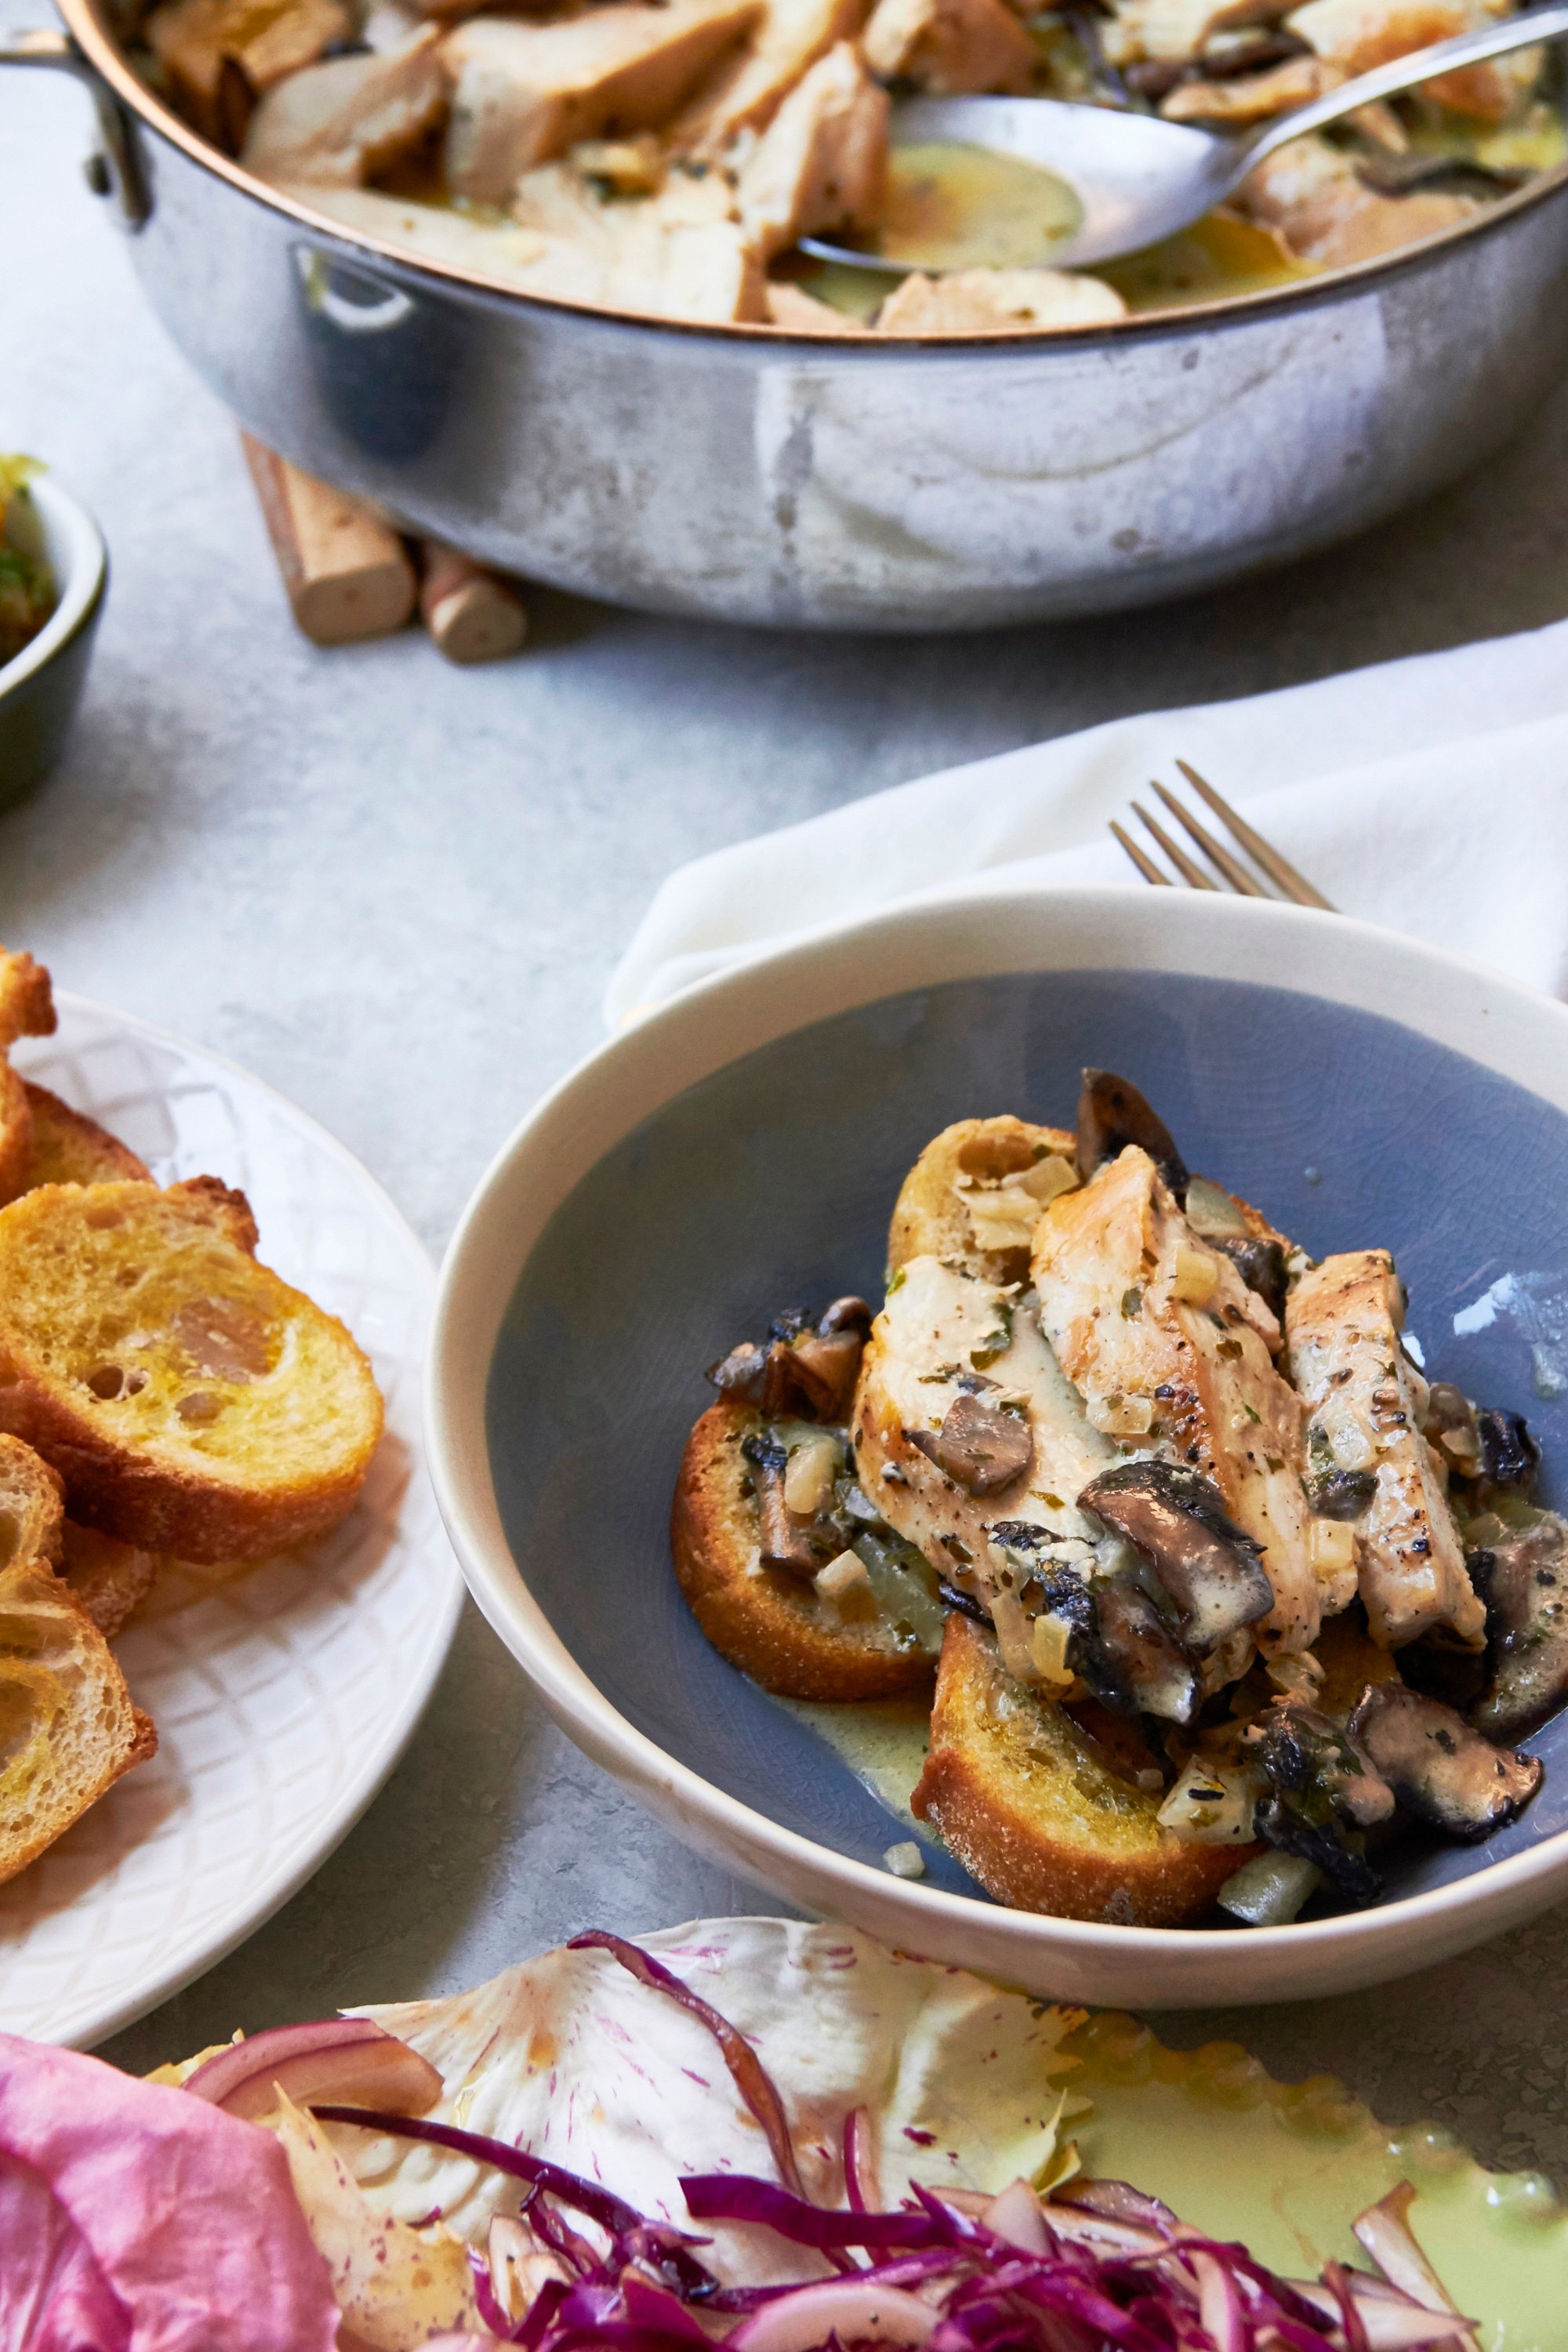 Chicken with Mushrooms in Cream Sauce over toasts in a blue bowl.